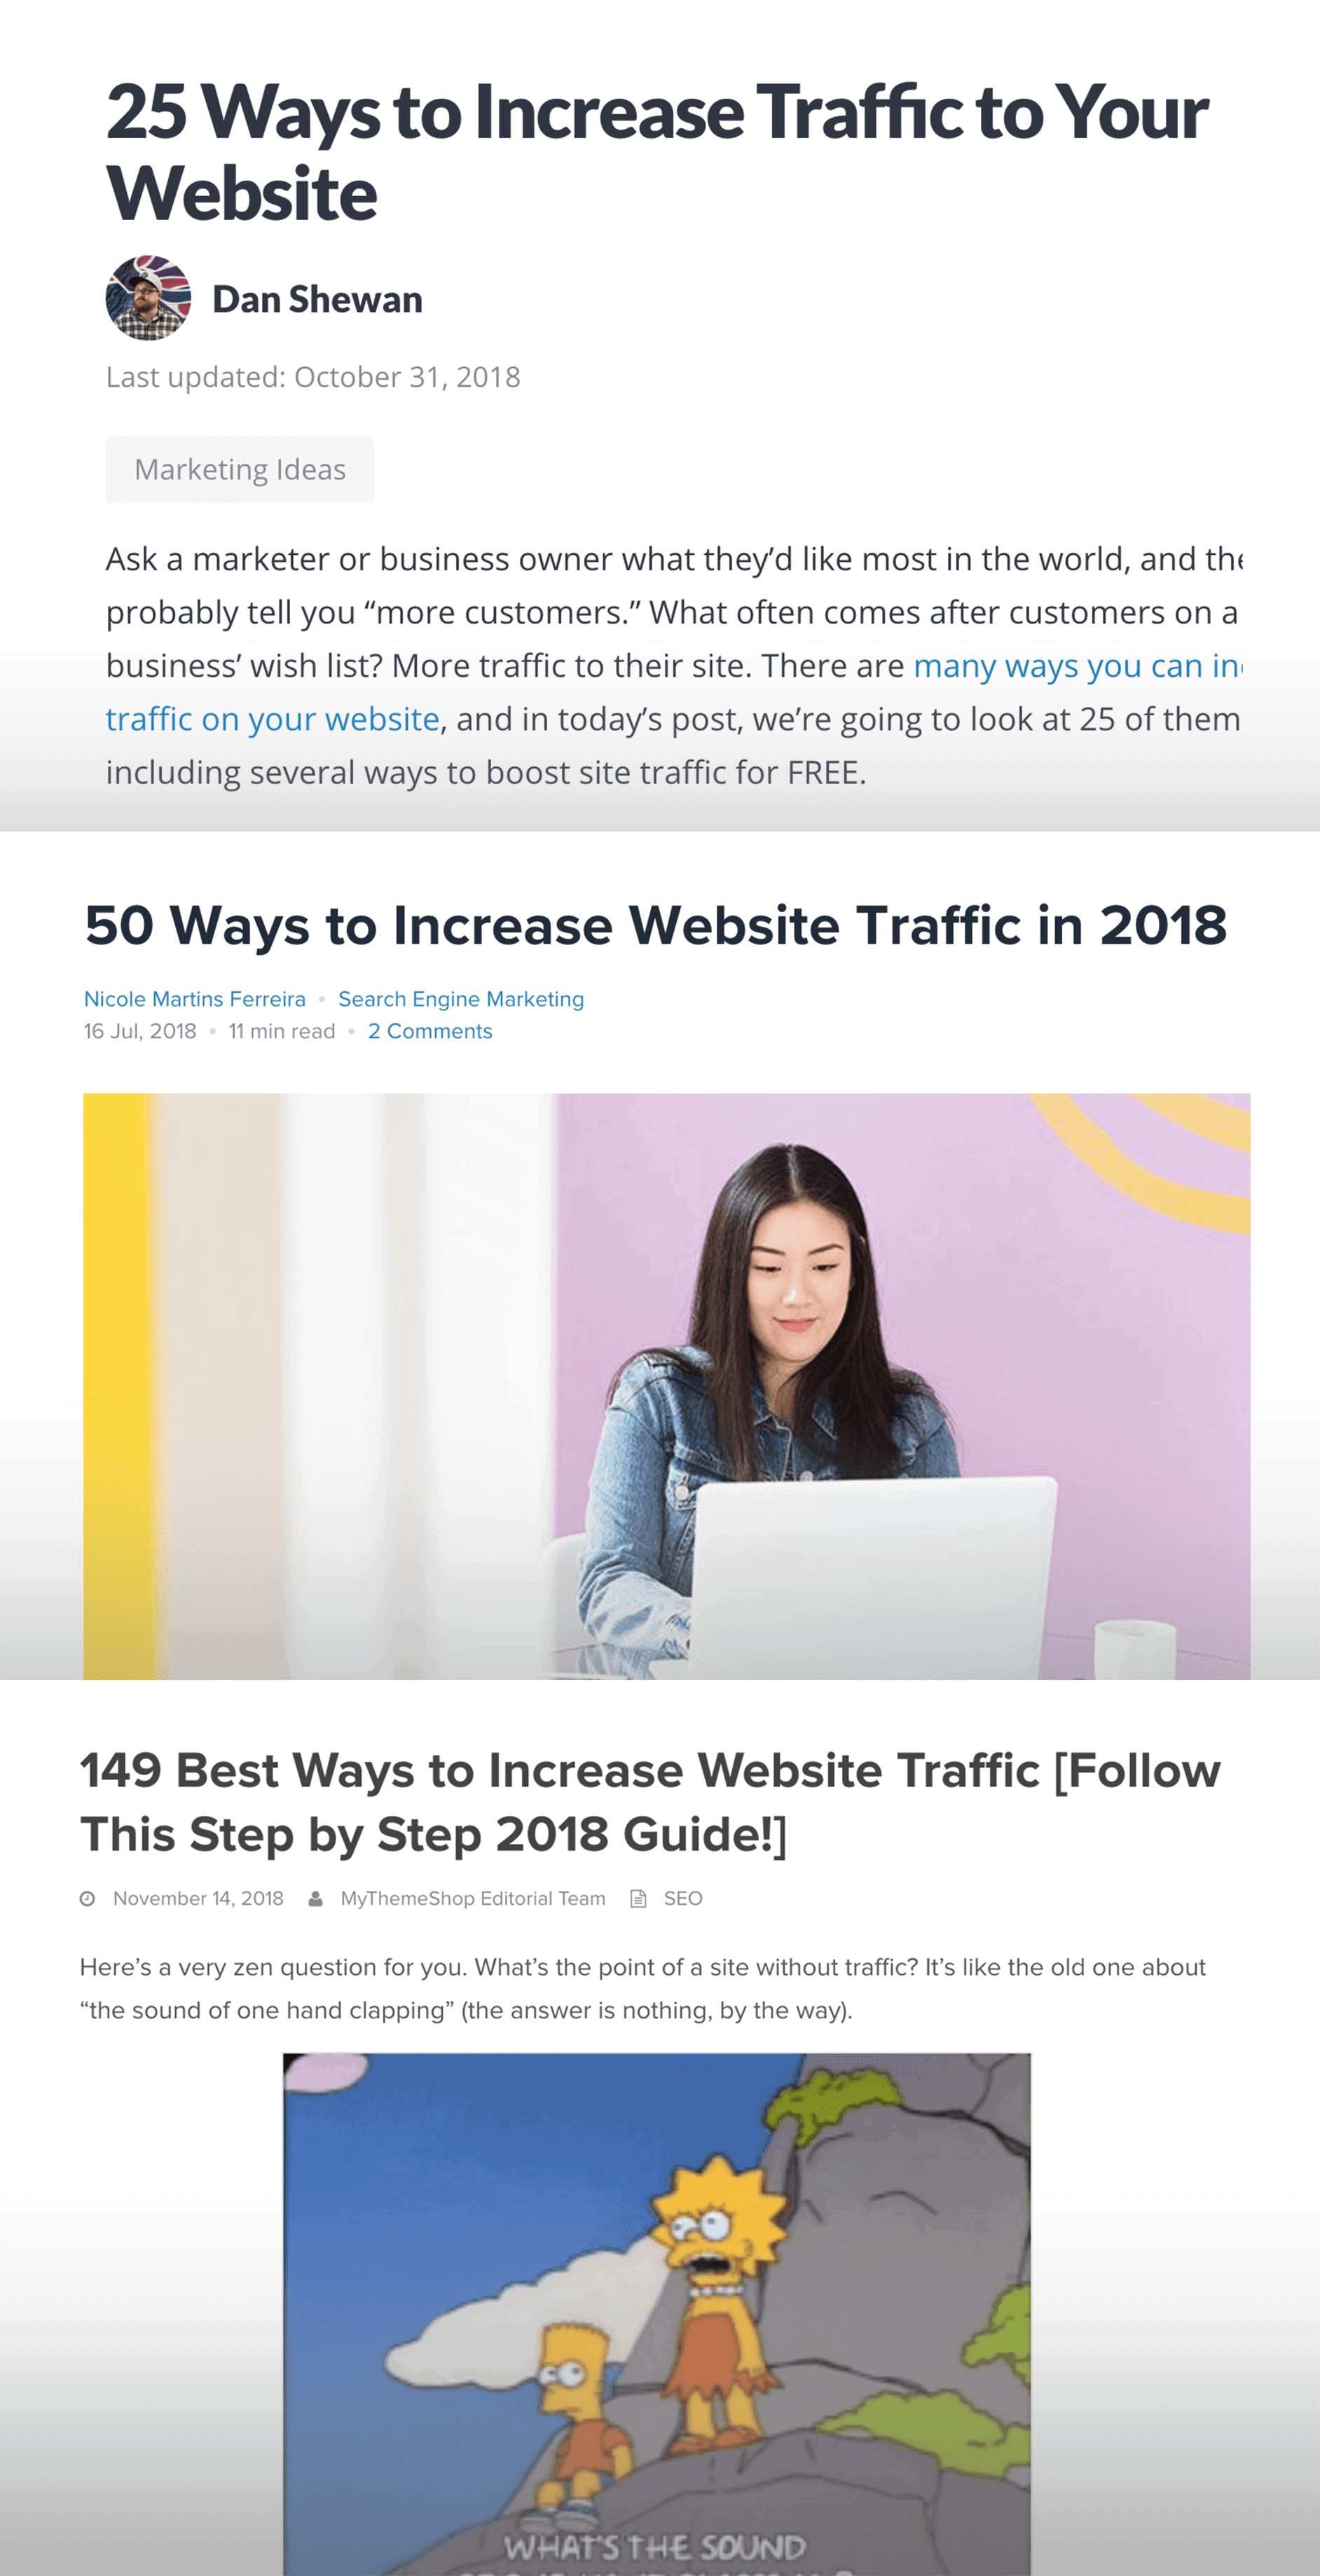 "Increase Website Traffic" – Existing content